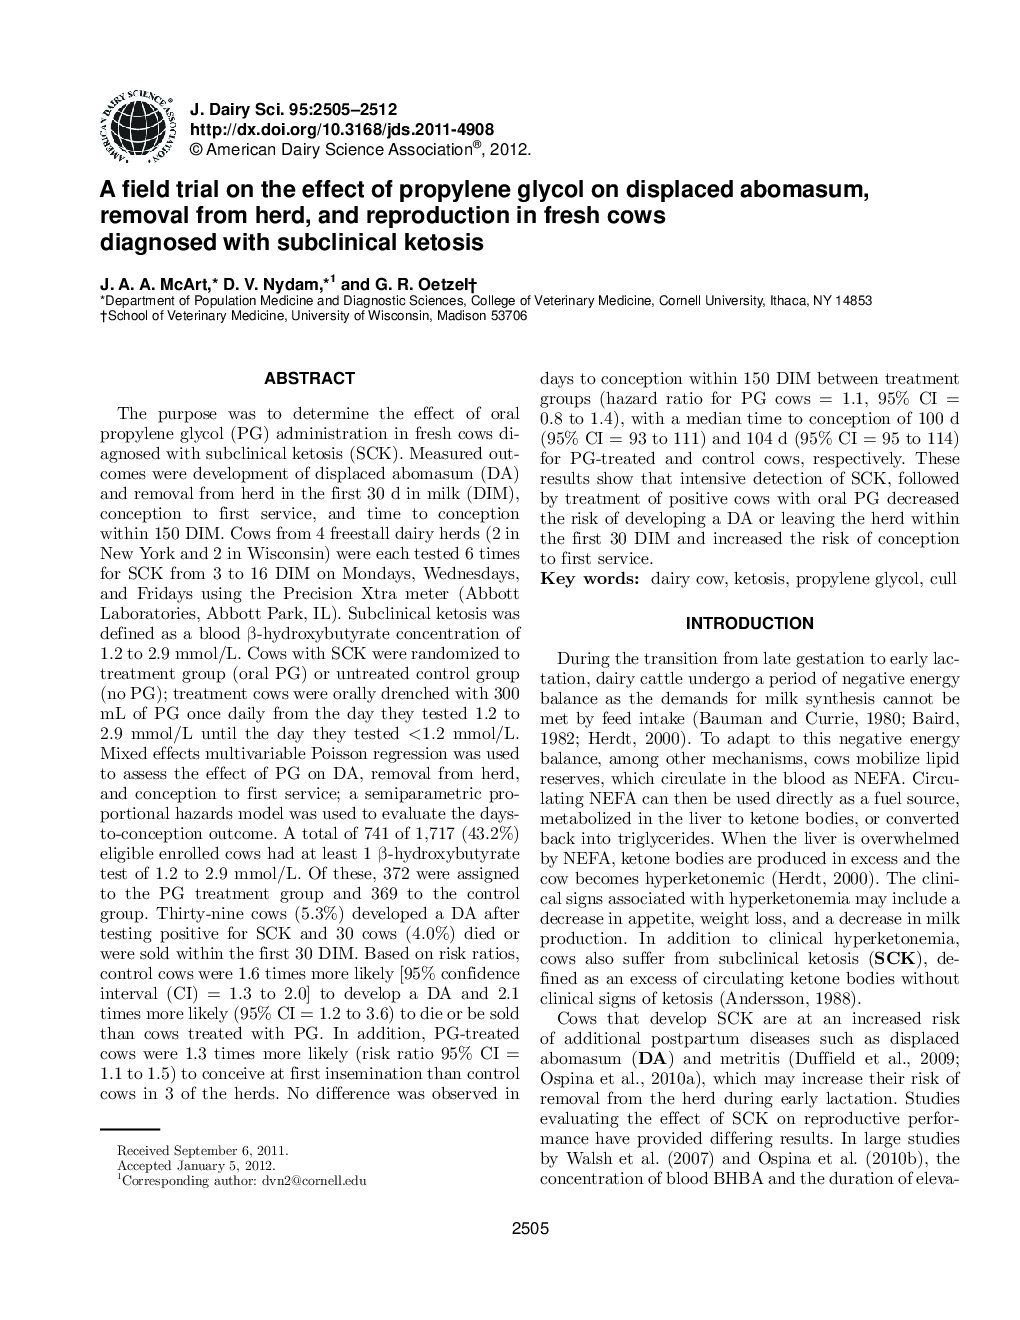 A field trial on the effect of propylene glycol on displaced abomasum, removal from herd, and reproduction in fresh cows diagnosed with subclinical ketosis